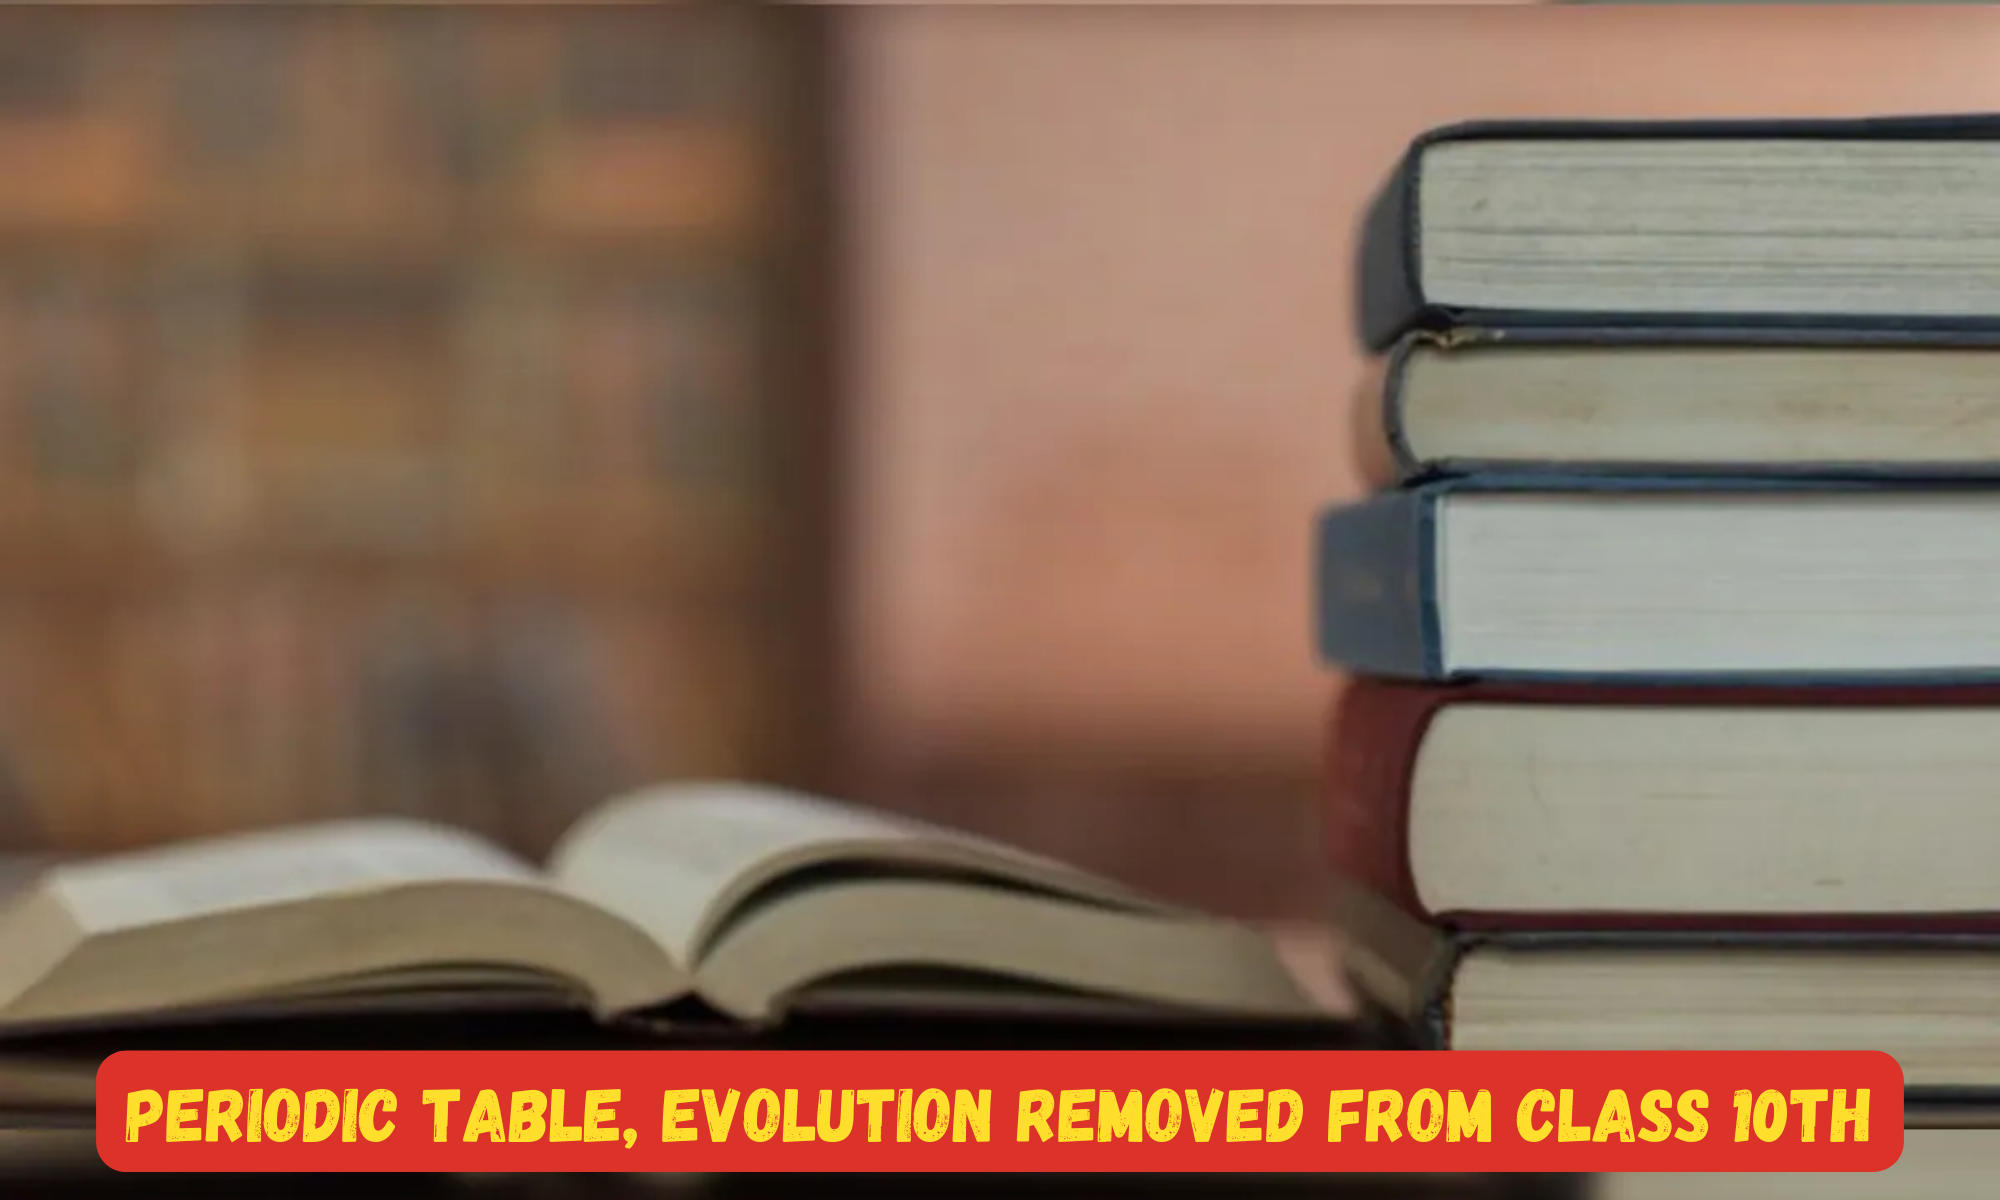 Periodic Table, Evolution removed from Class 10th